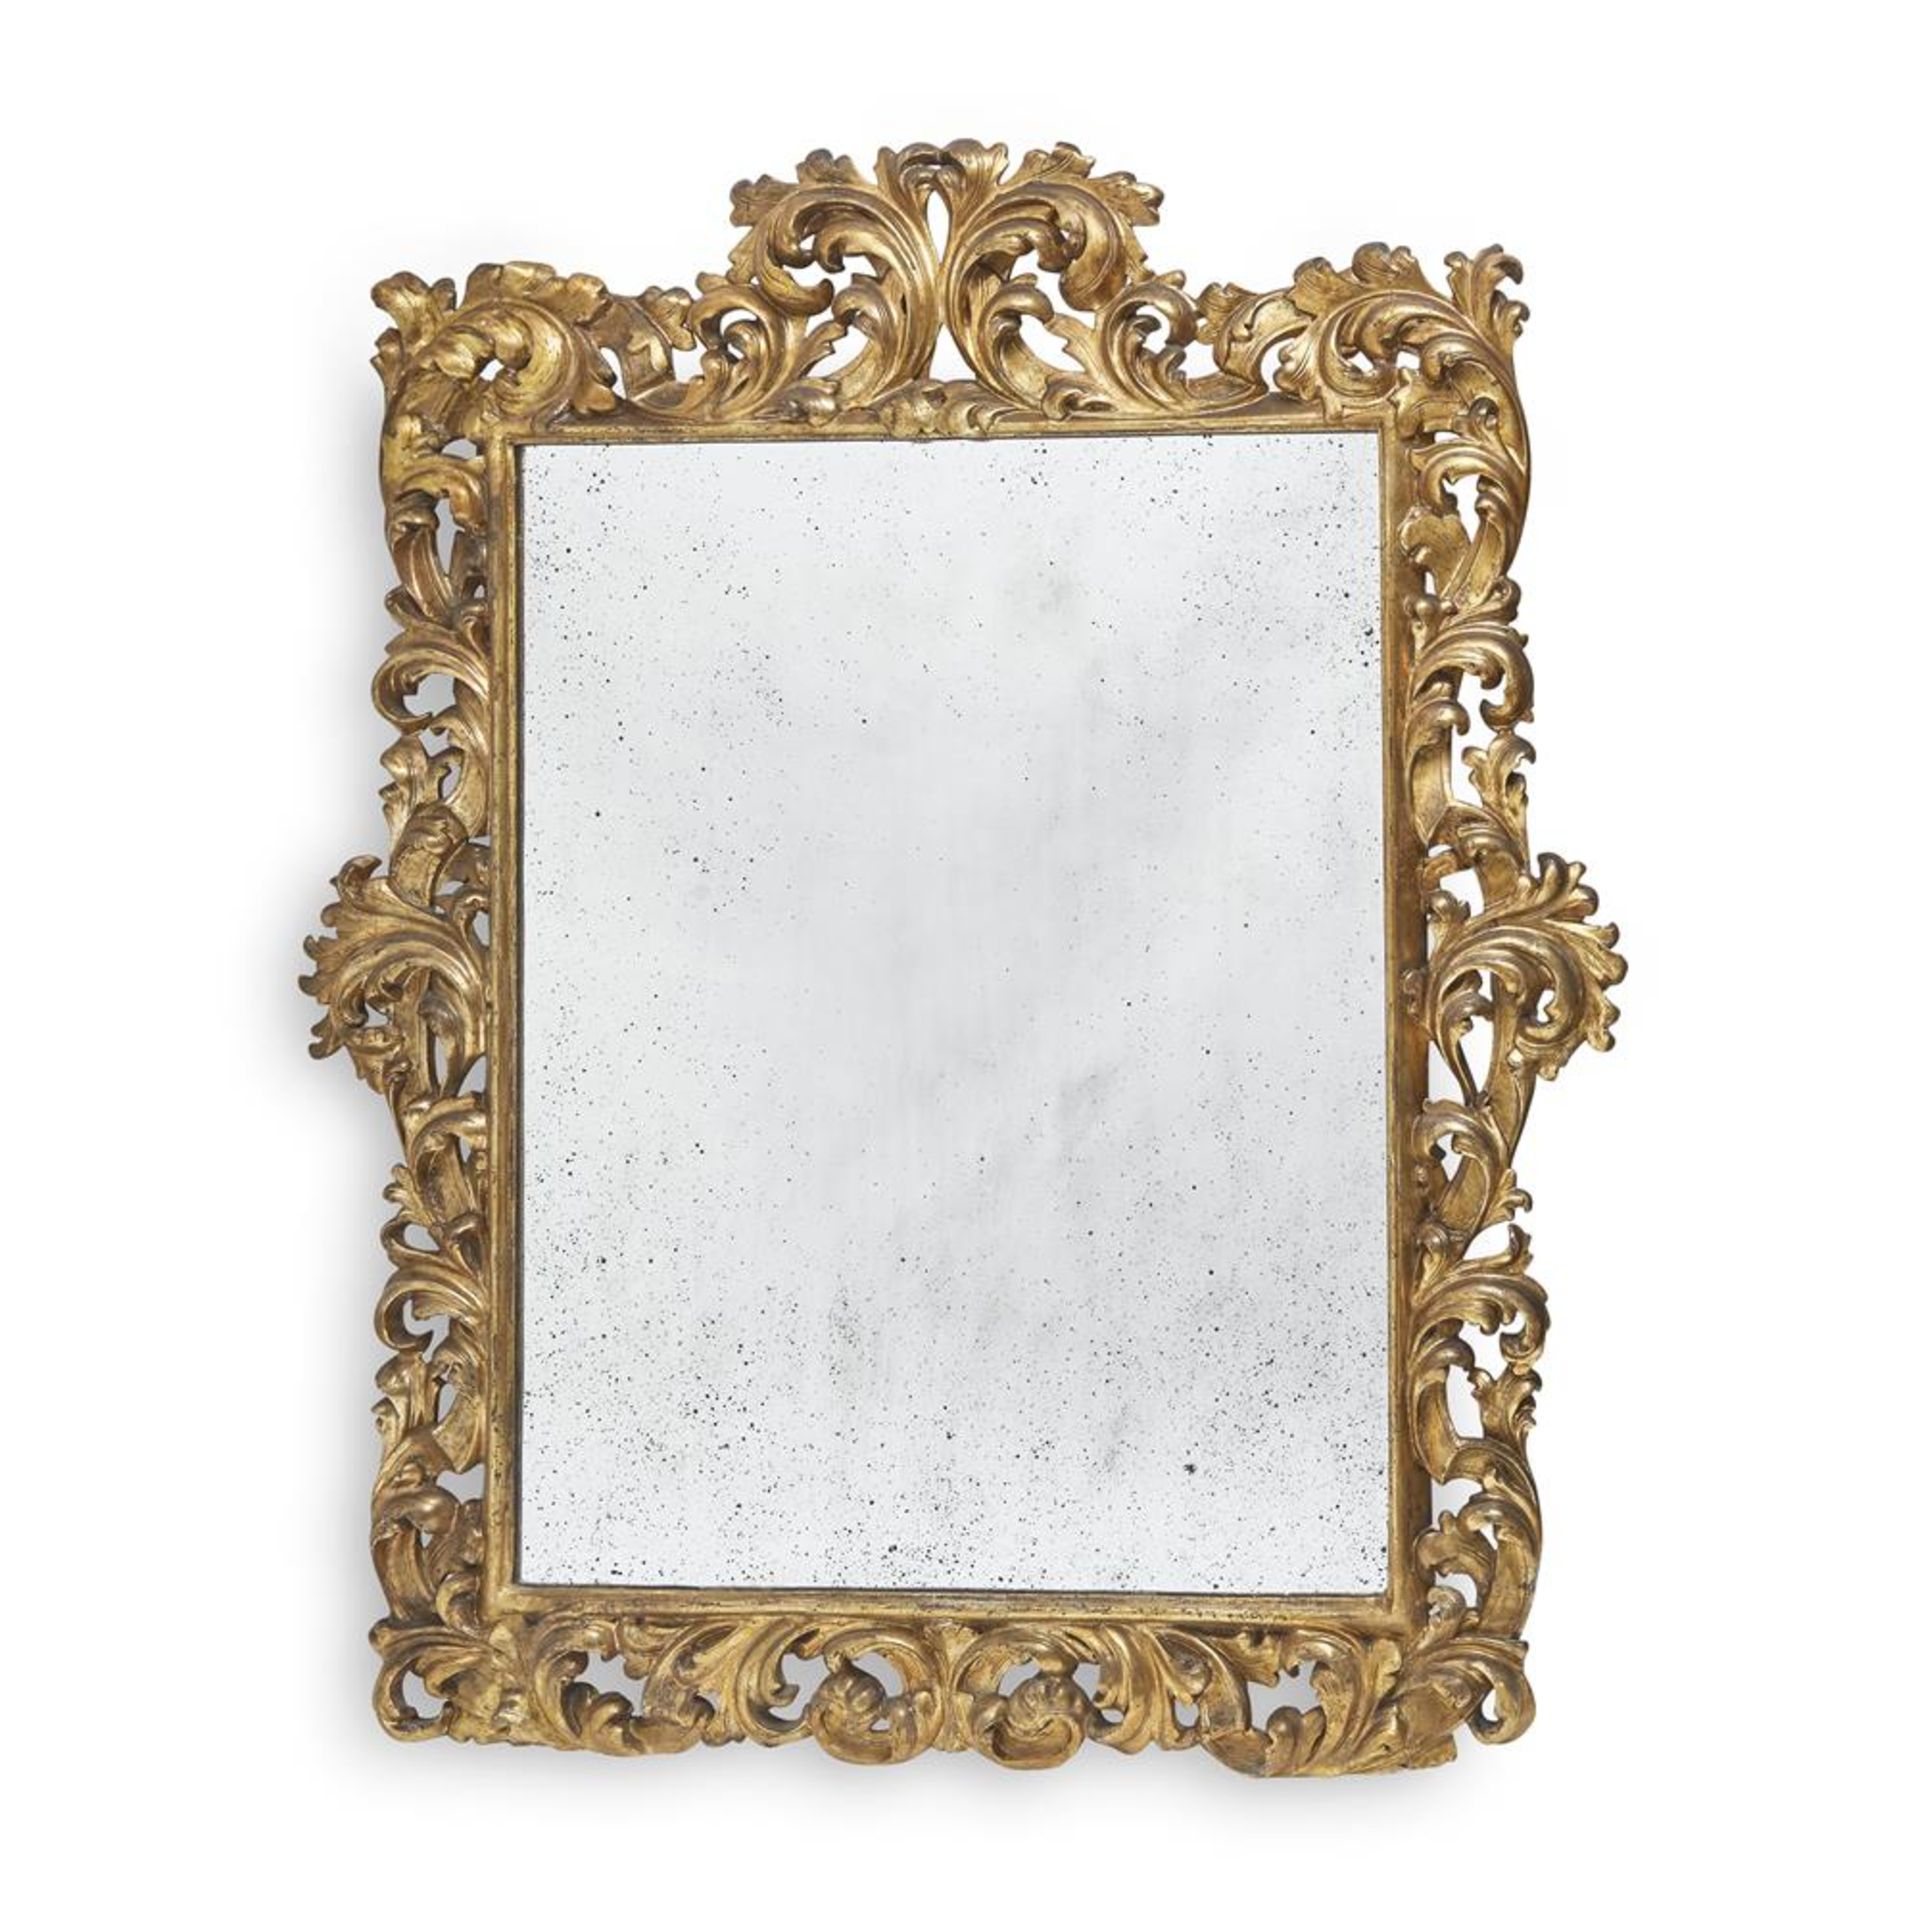 AN ITALIAN , PROBABLY FLORENCE, CARVED GILTWOOD AND GESSO WALL MIRROR, 19TH CENTURY